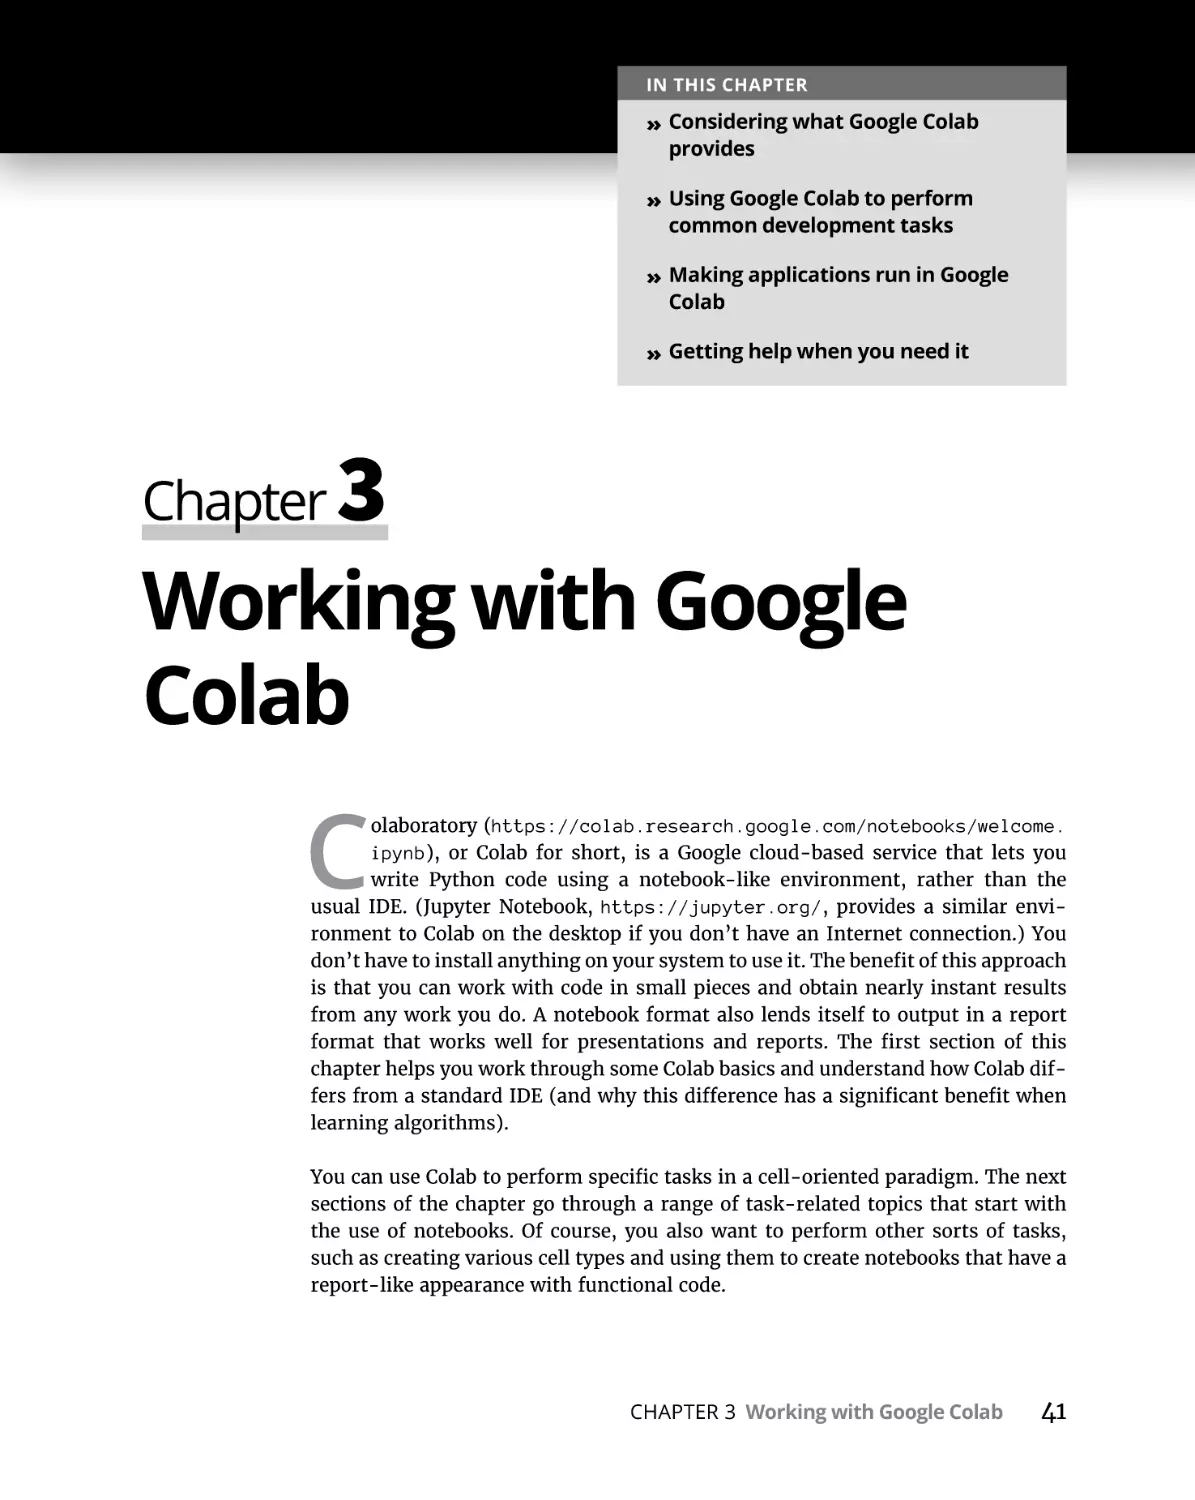 Chapter 3 Working with Google Colab